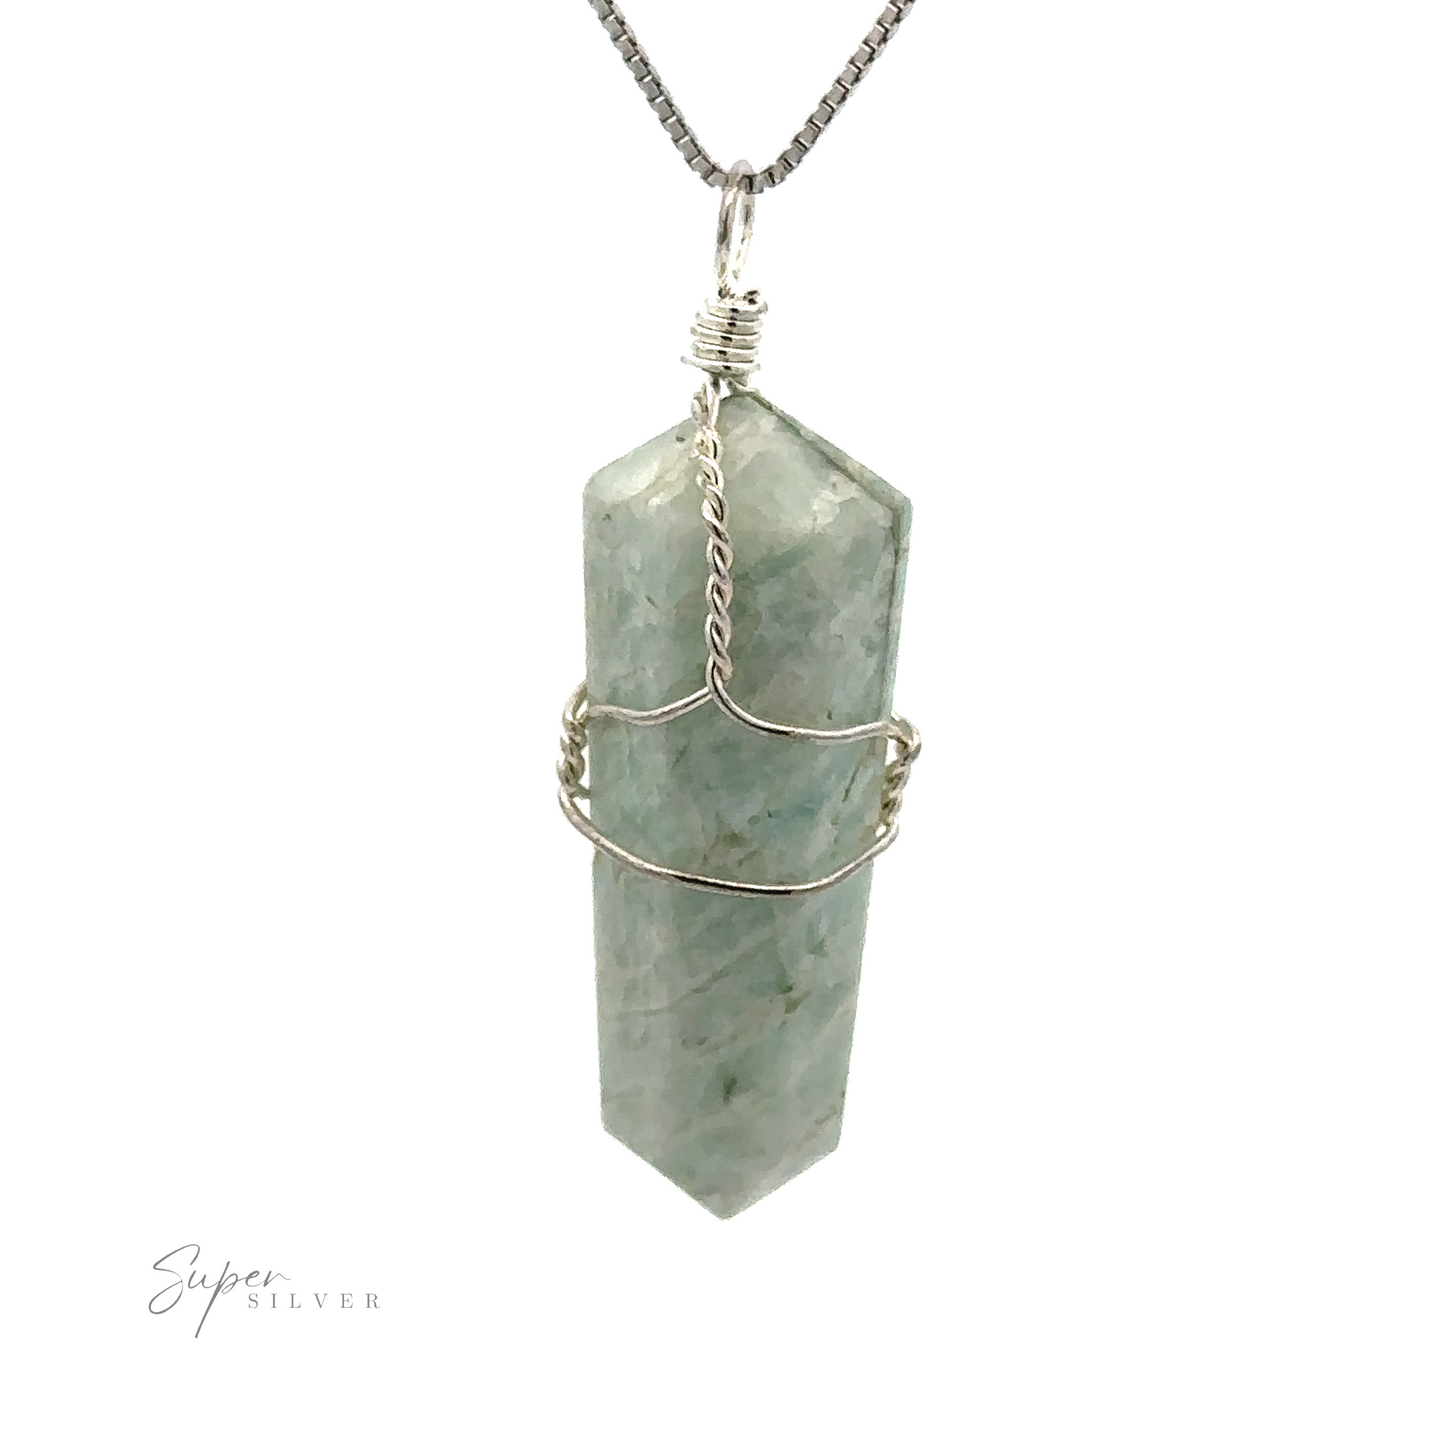 
                  
                    An aqua blue, obelisk-shaped gemstone encased in silver wire hangs elegantly from a silver chain necklace. The Wire-Wrapped Stone Pendant boasts the "Super Silver" logo gracing the bottom left corner.
                  
                